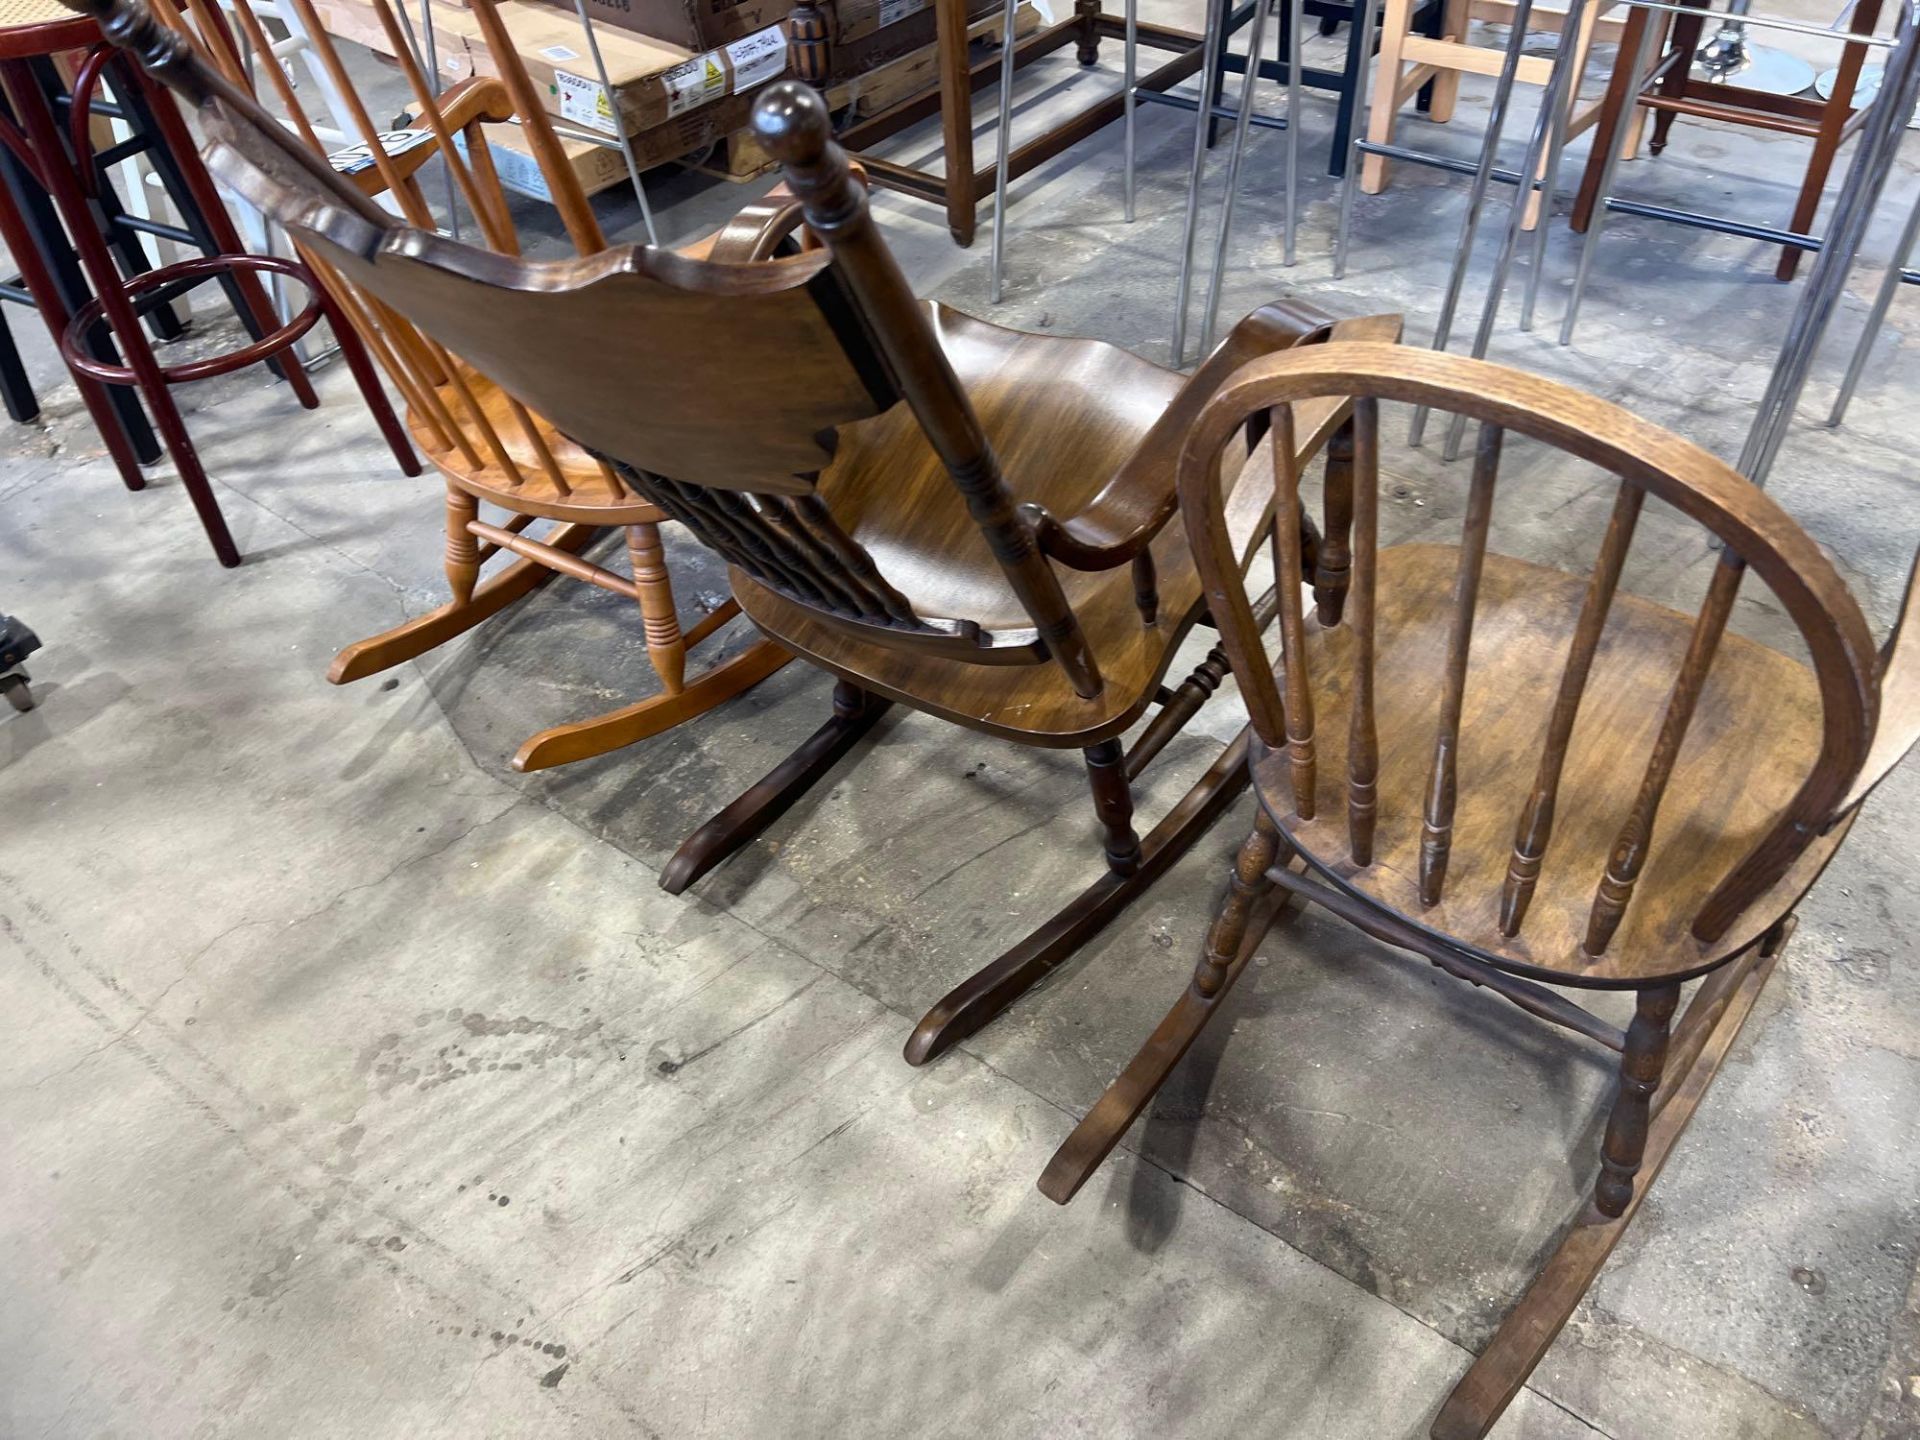 3 Assorted Wooden Rocking Chairs - Image 4 of 4